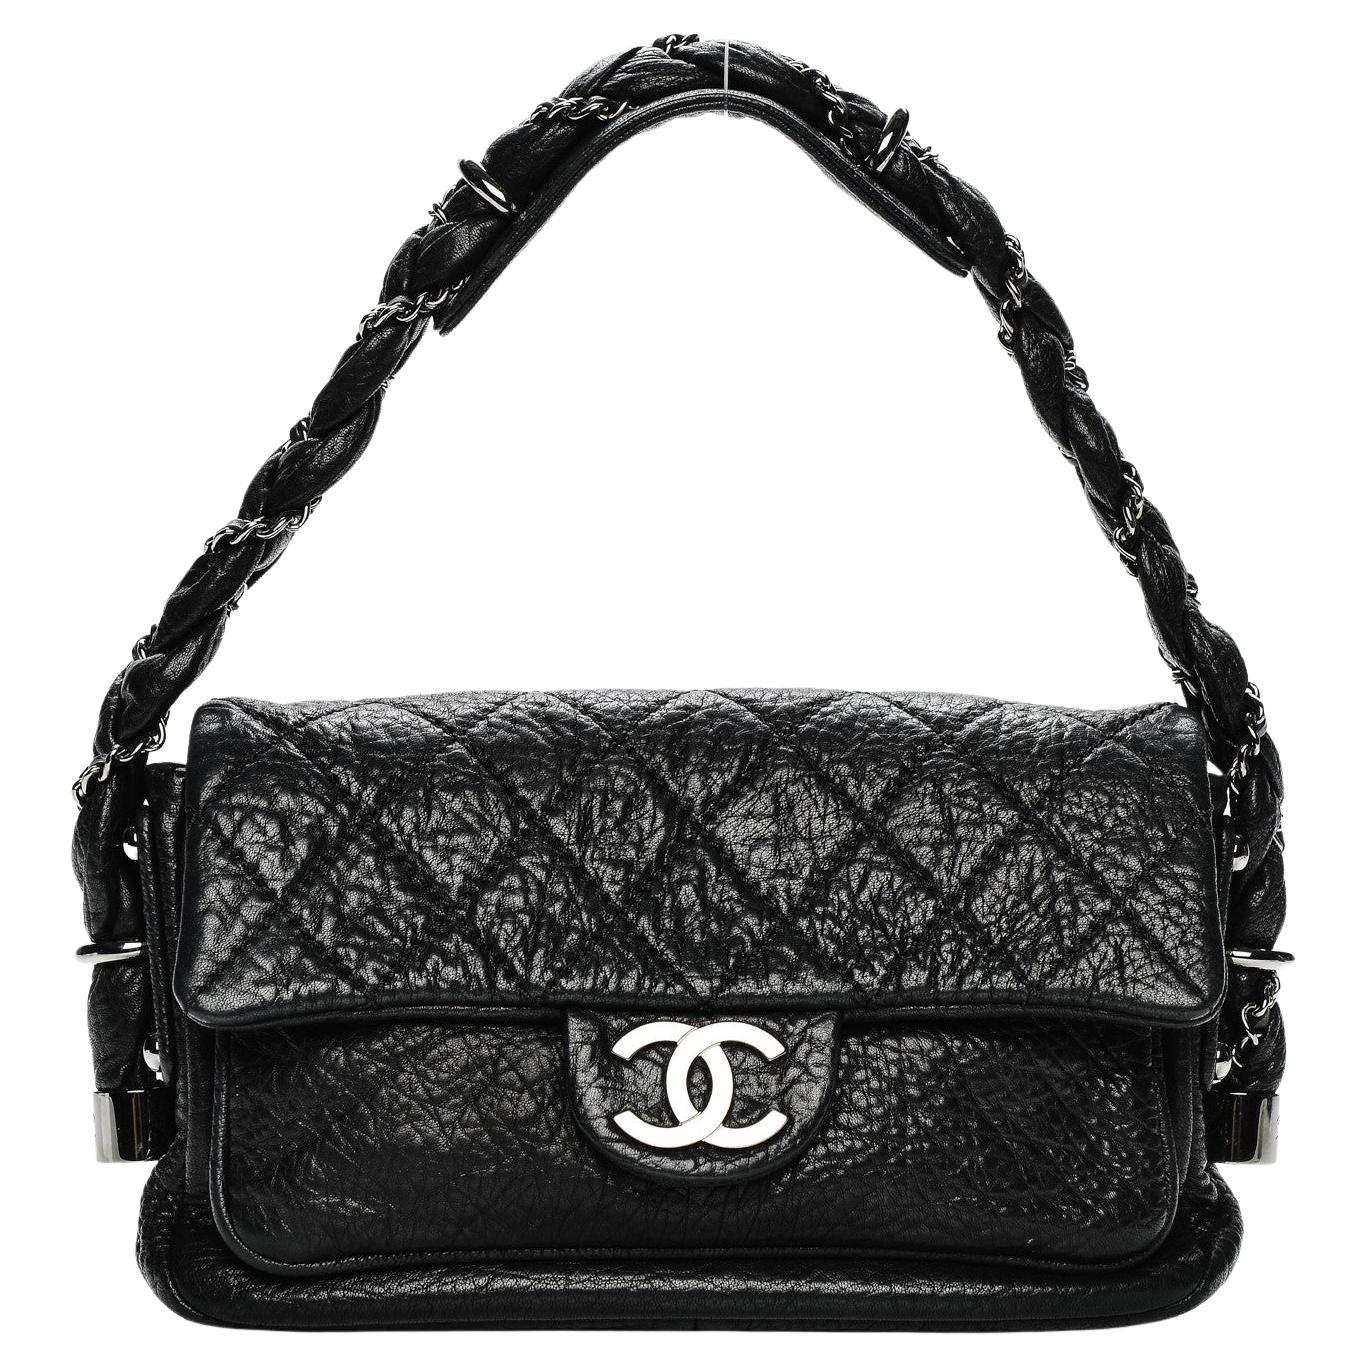 Chanel 2006 Classic Flap Braid Quilted Small Black Distressed Lambskin Bag